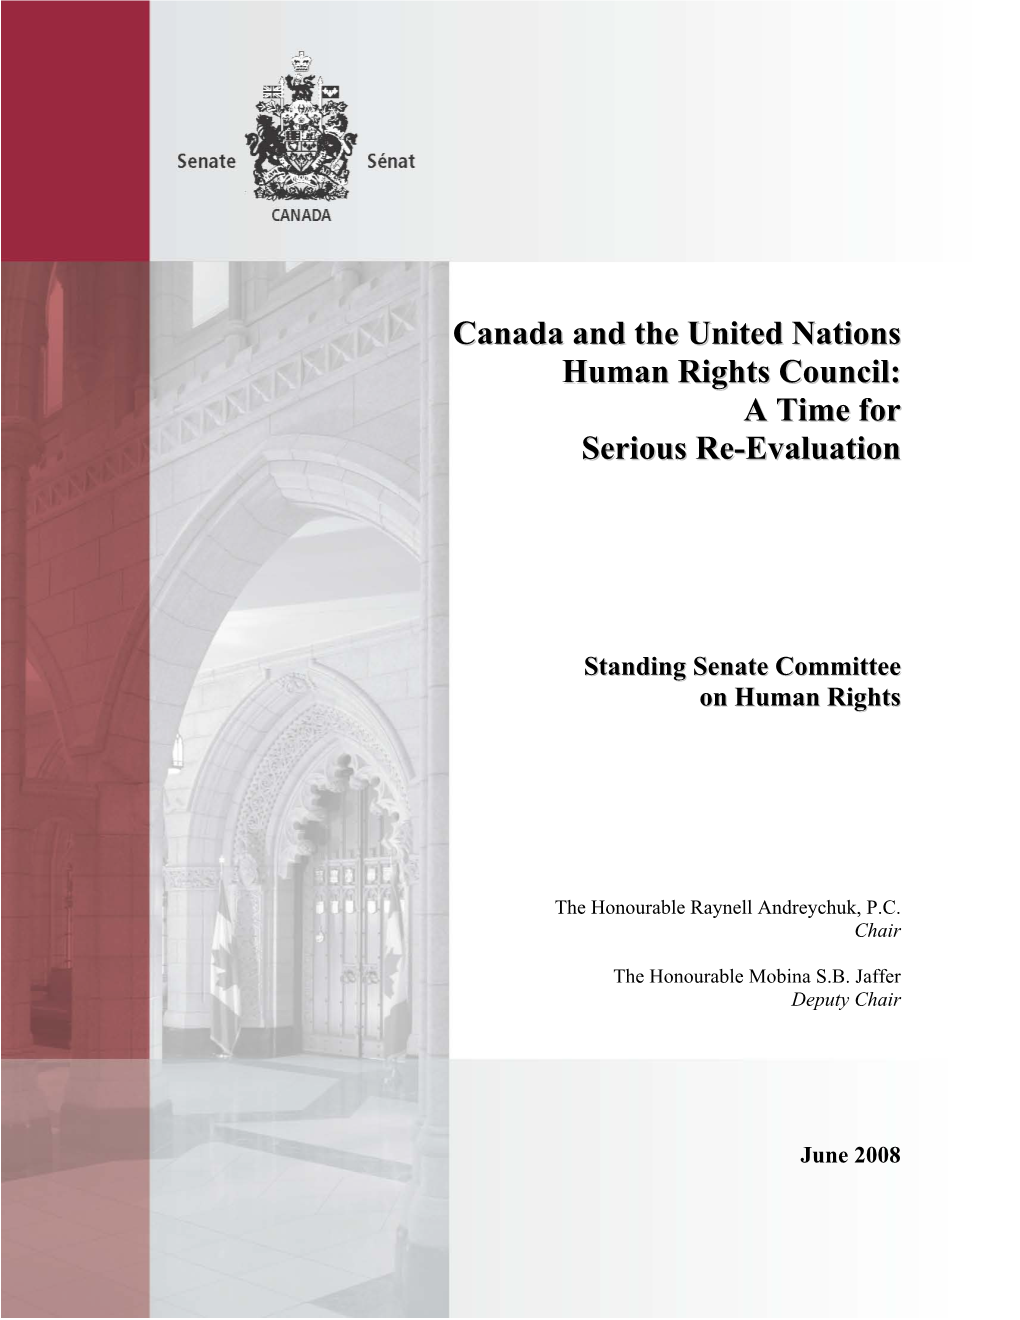 Canada and the United Nations Human Rights Council: a Time for Serious Re-Evaluation